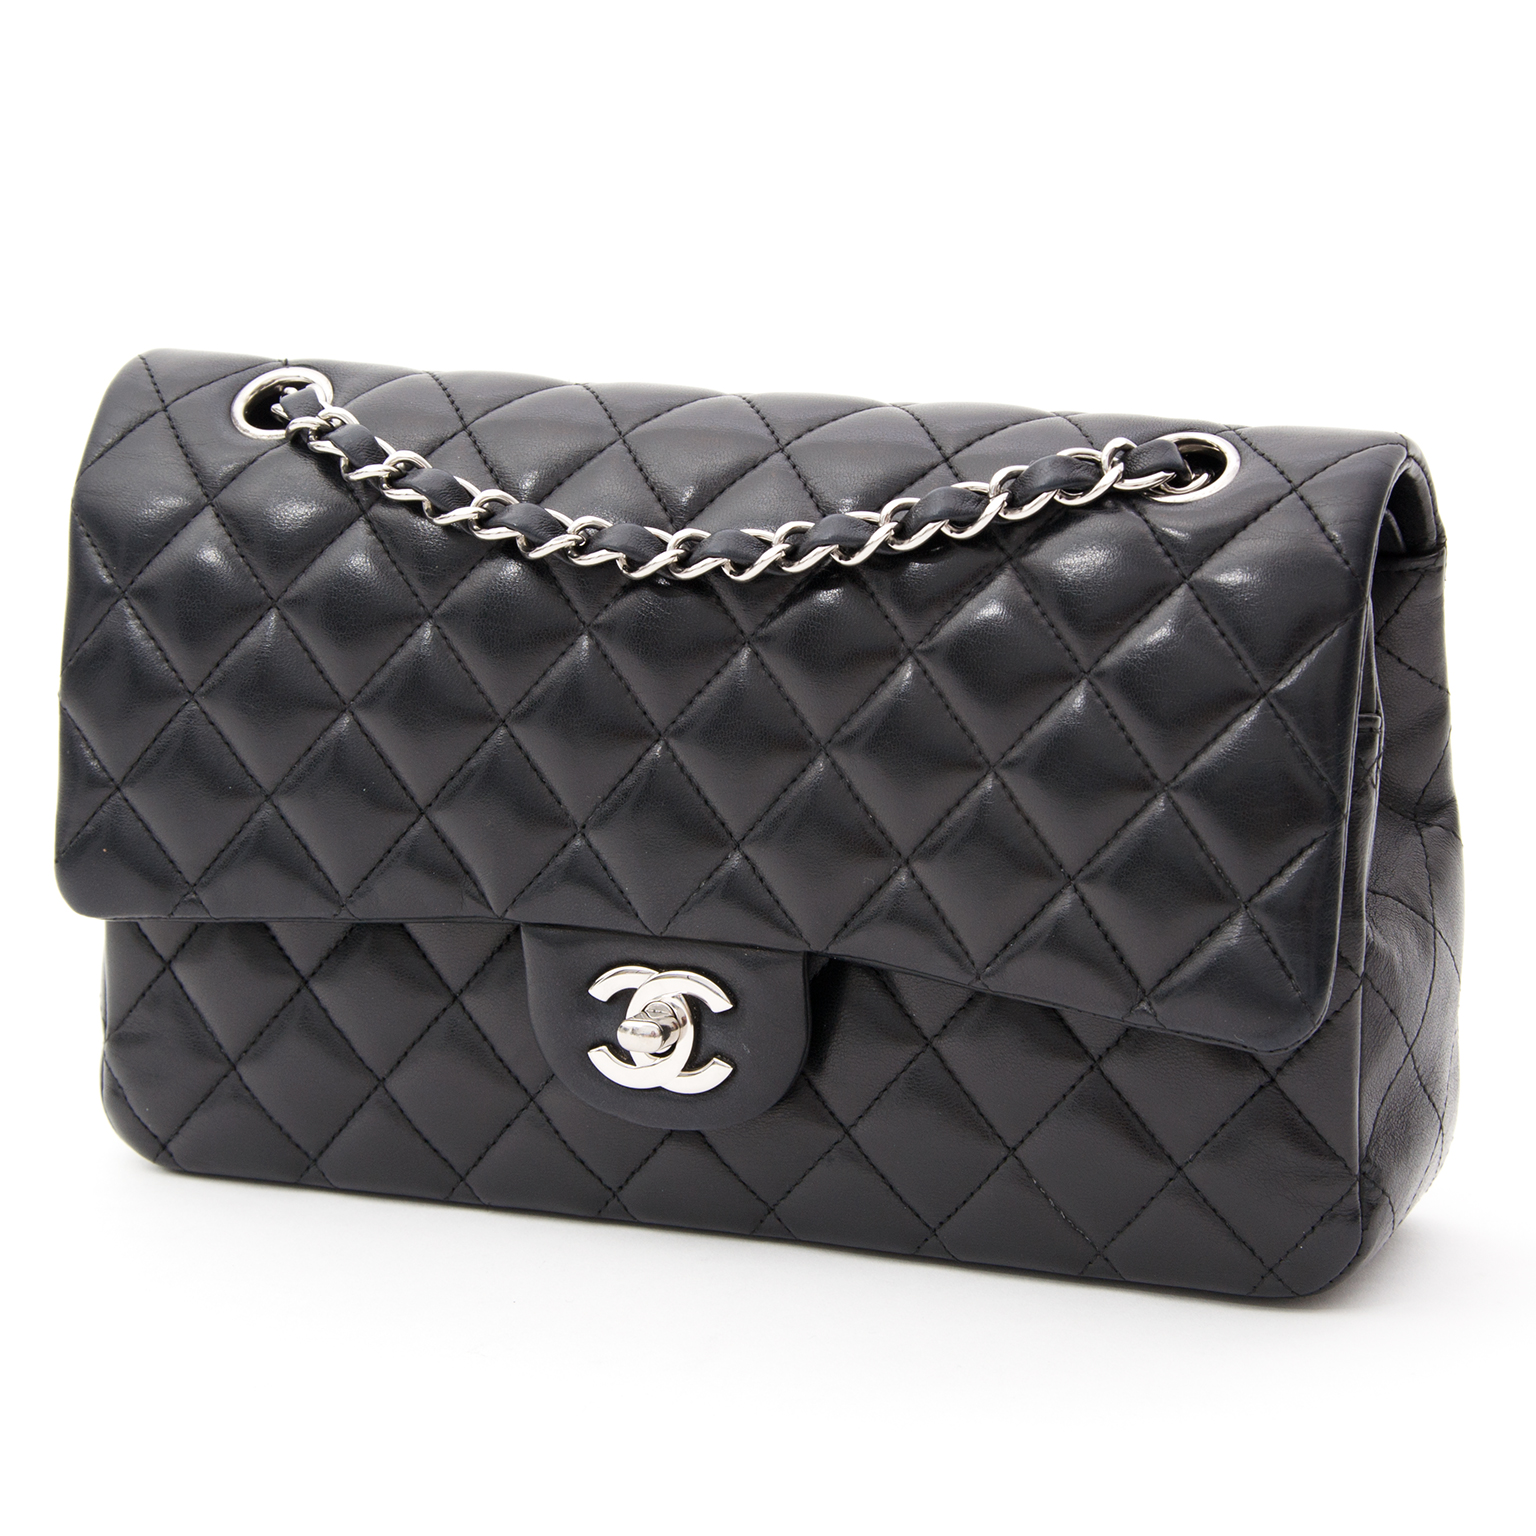 Chanel Classic Flap Medium Quilted Lambskin Silver Bag